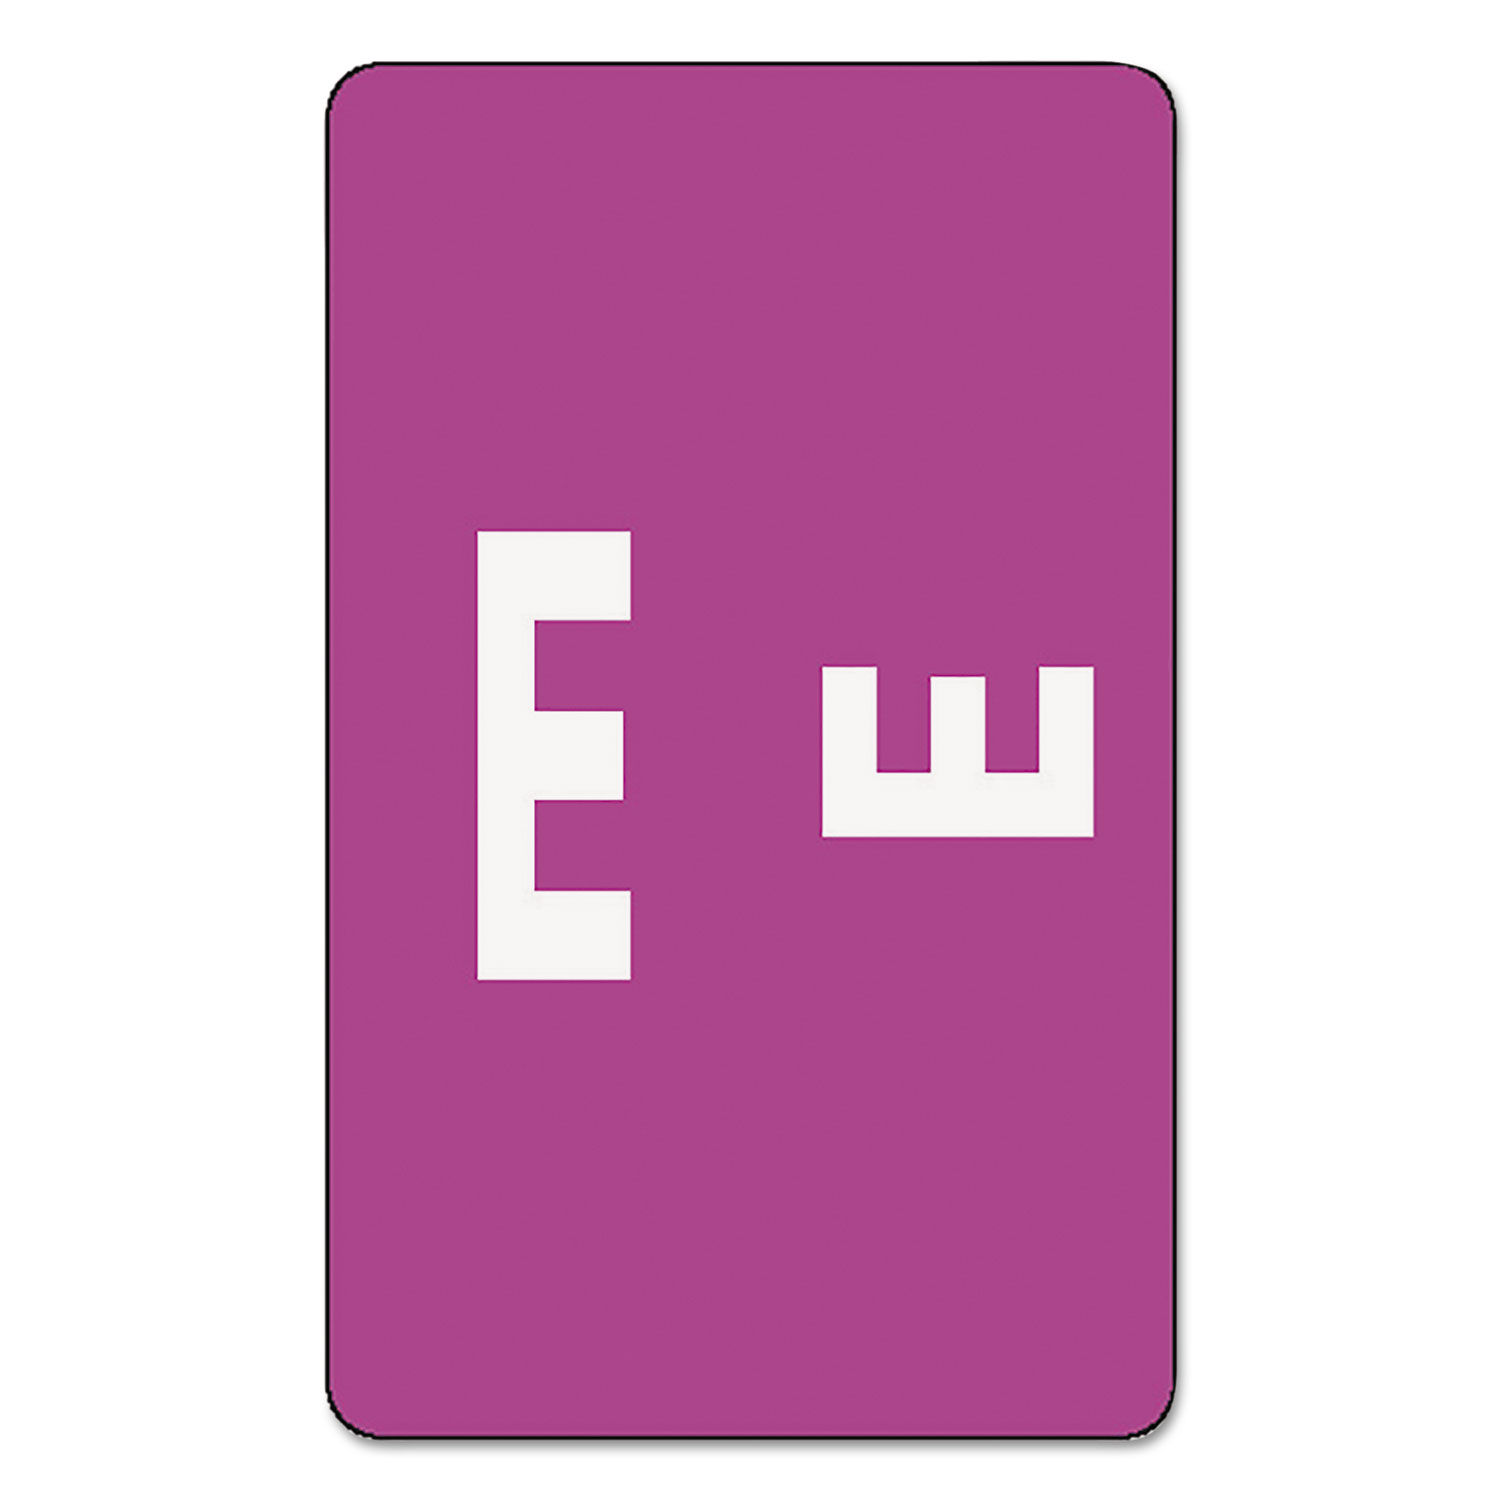 color with second letter e